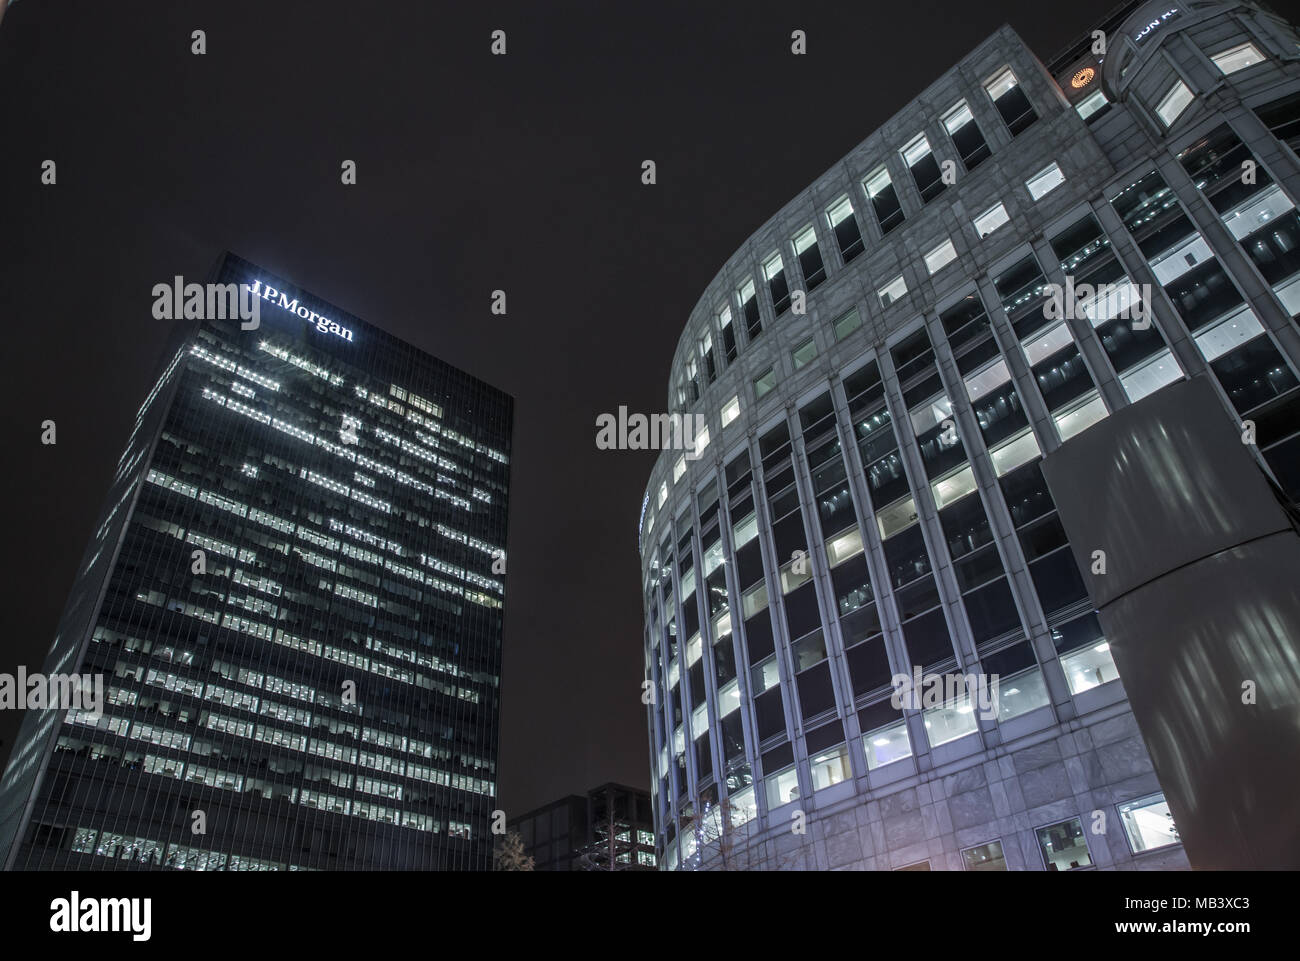 Night Photography on the Isle of Dogs Stock Photo